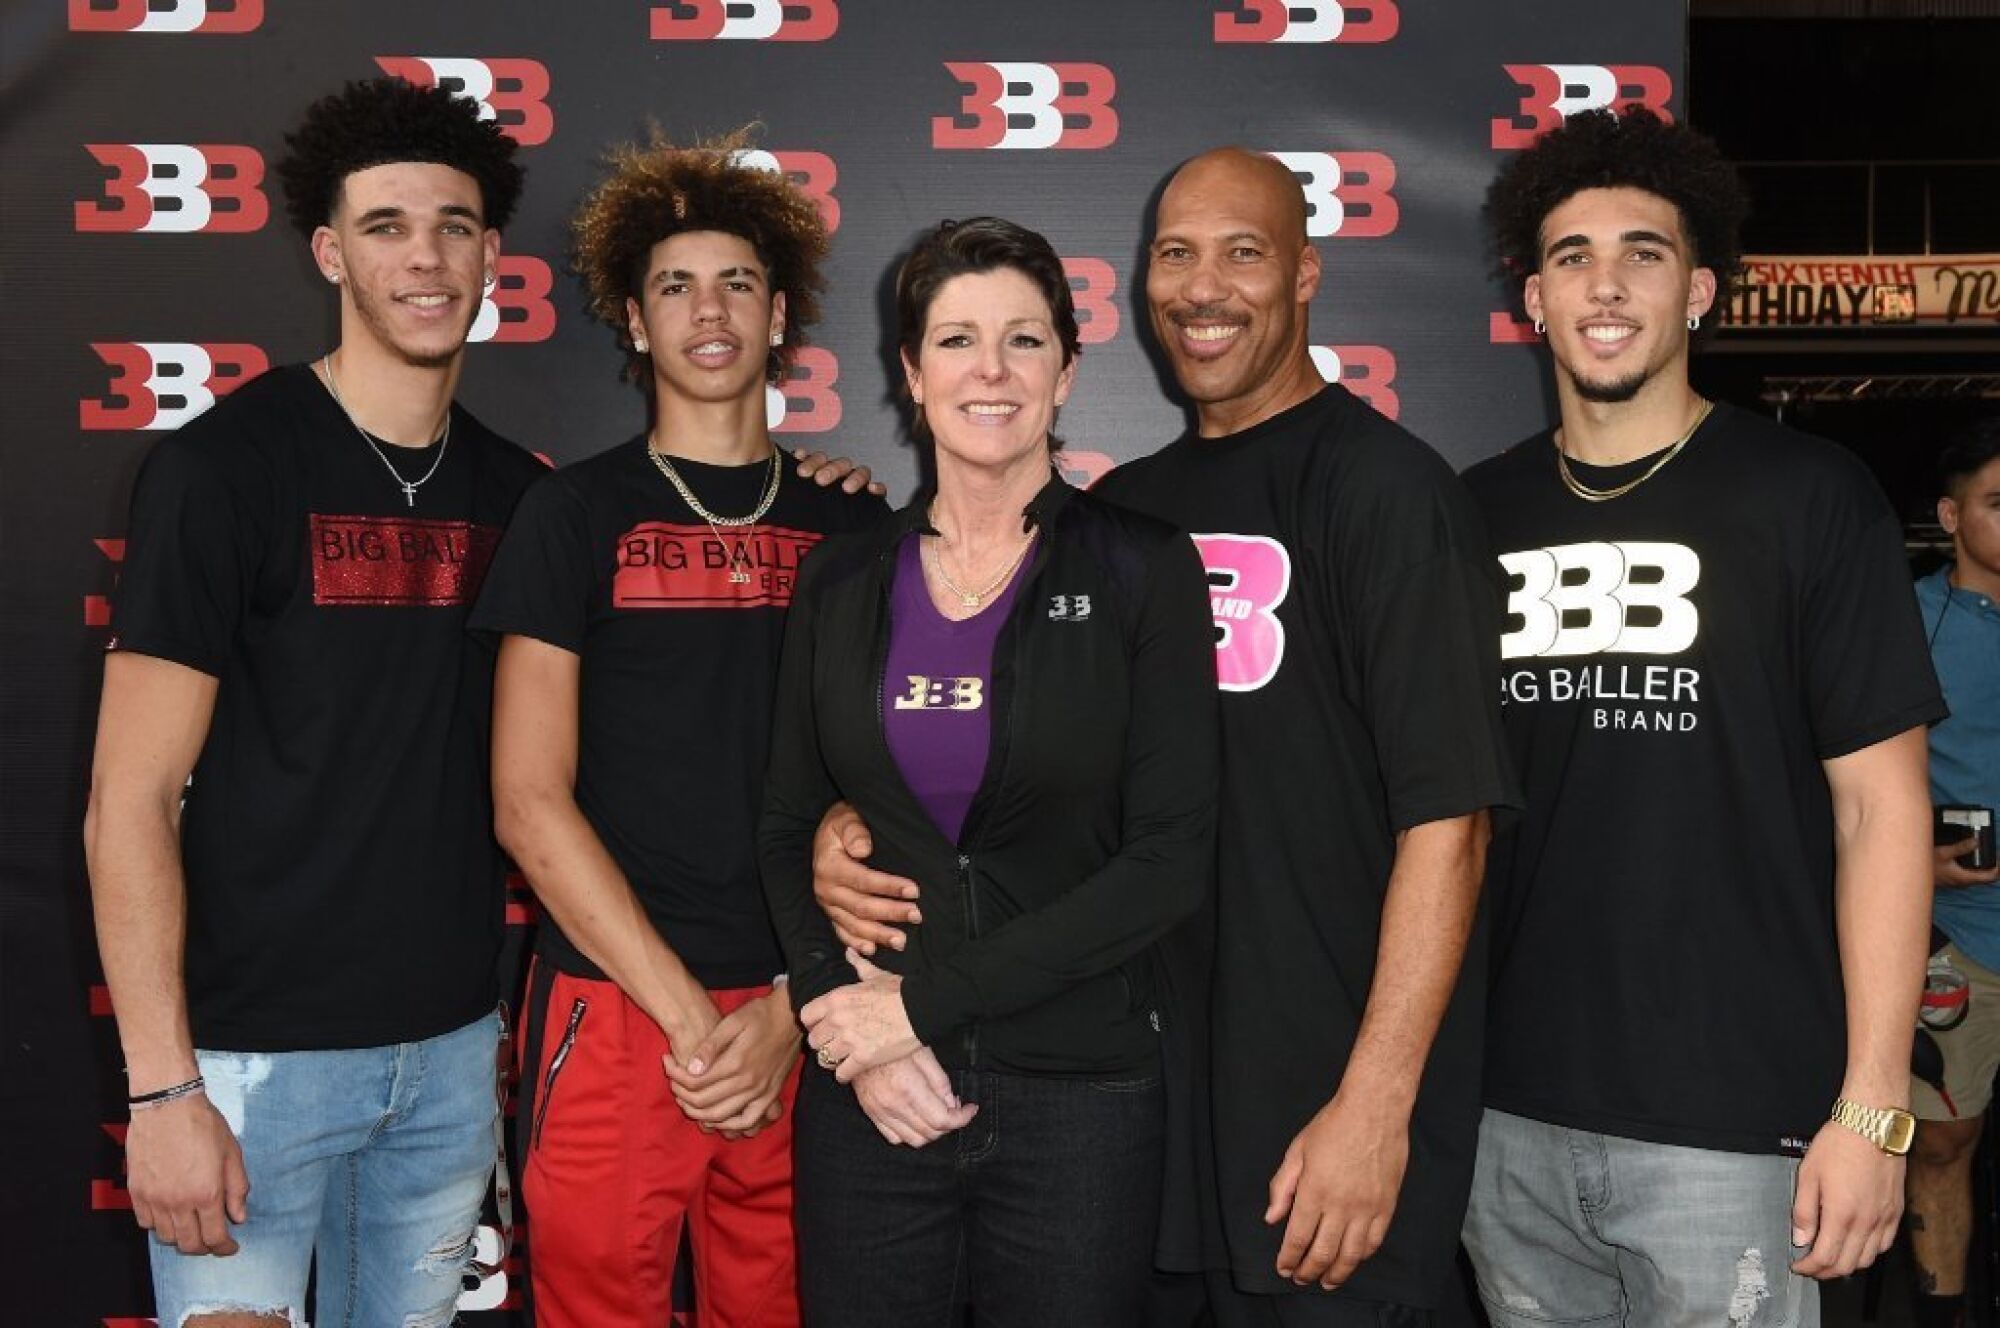 LaVar Ball, second from right, with sons (from left) Lonzo, LaMelo and LiAngelo and wife Tina.